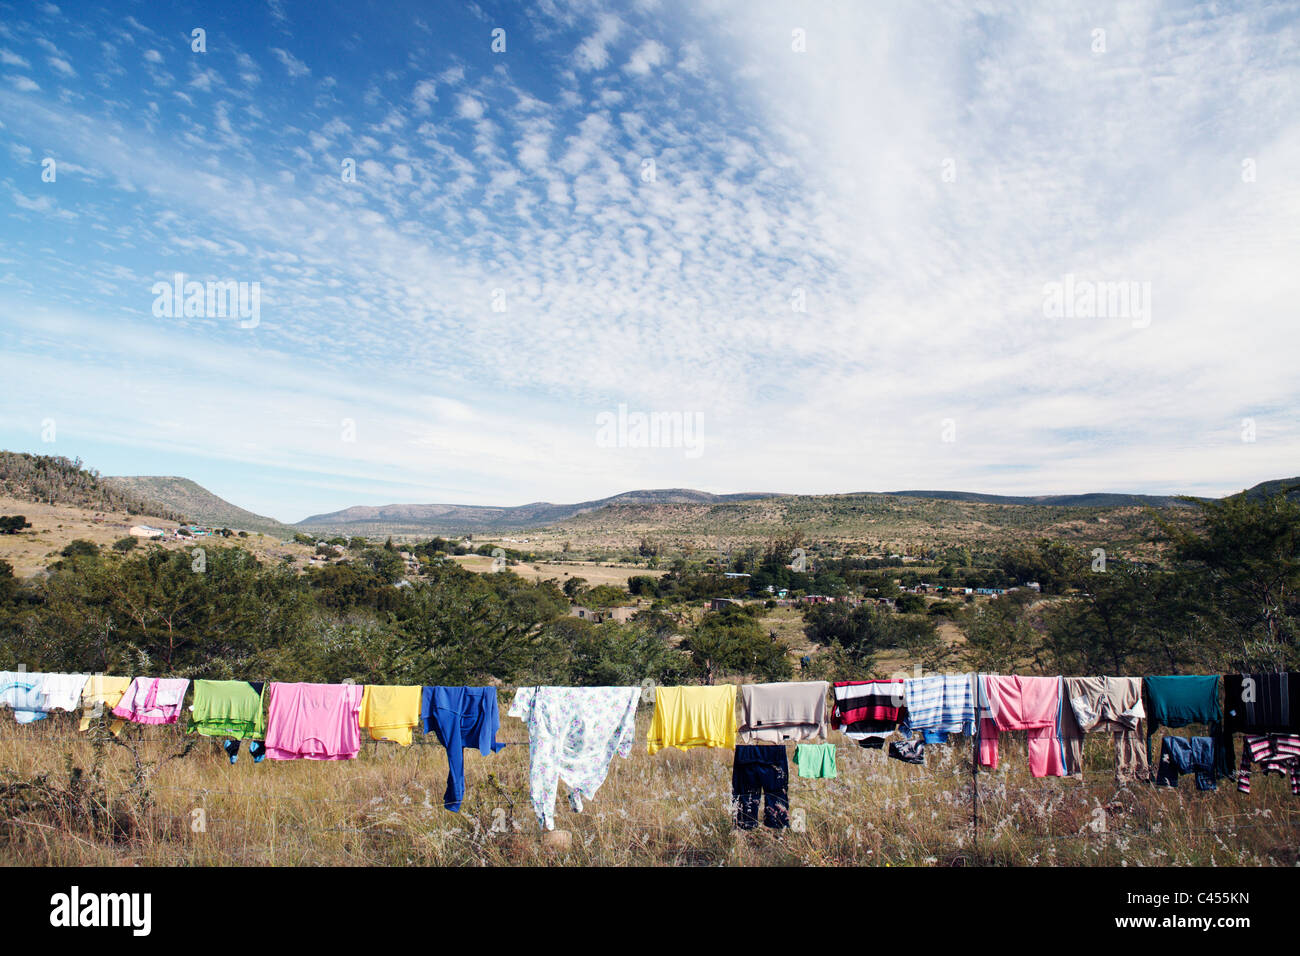 Washing on Fence in Rural Africa, nr Fort Beaufort, Eastern Cape, South Africa Stock Photo